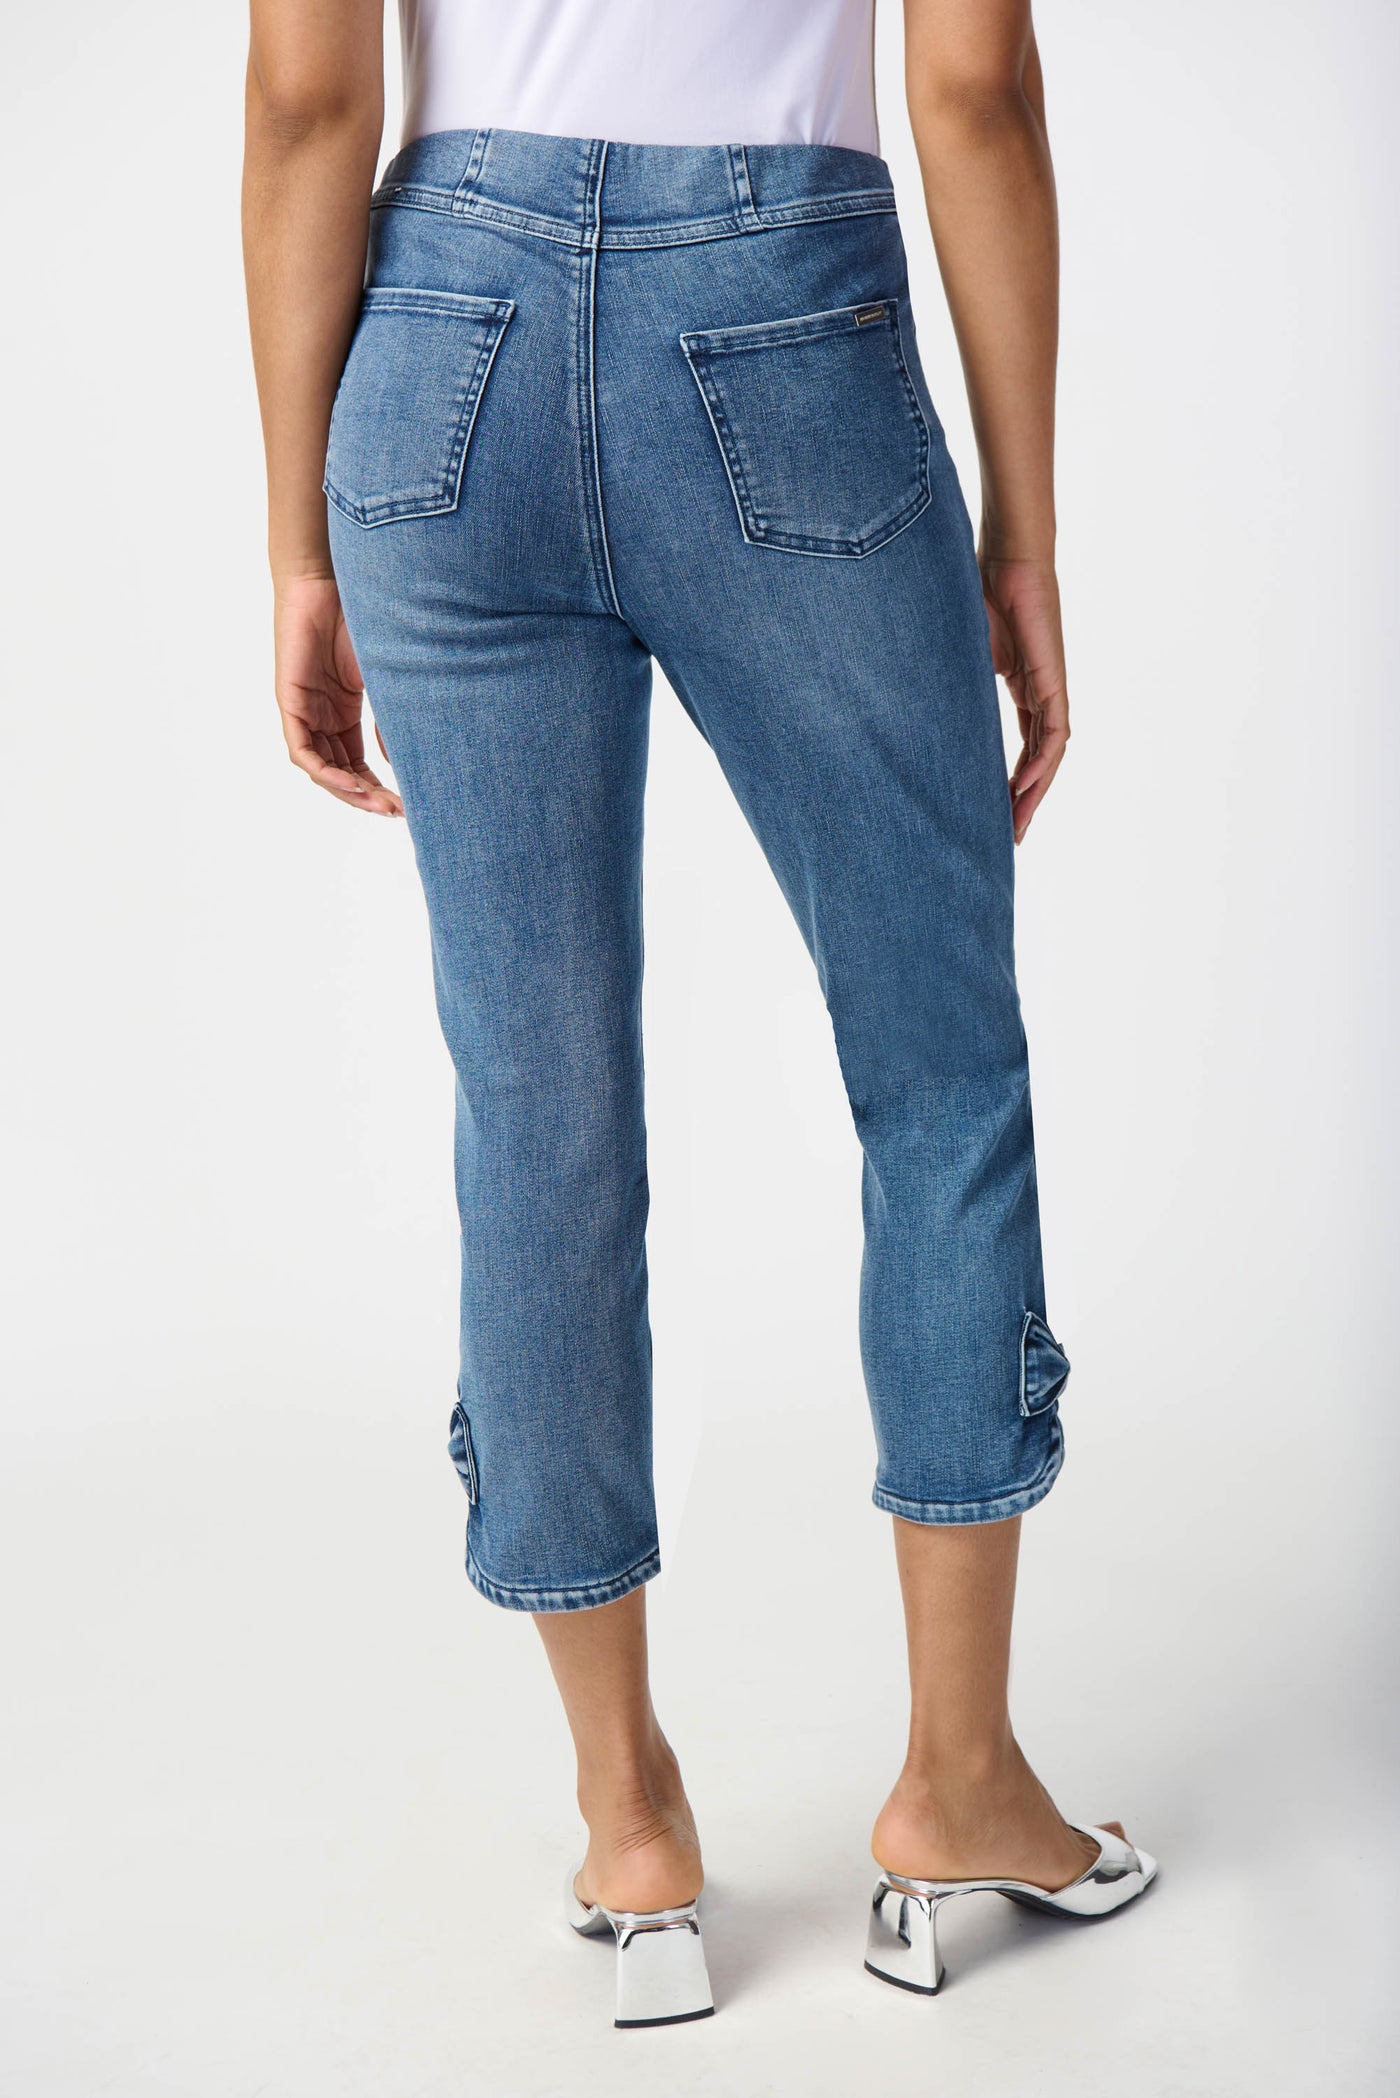 Joseph Ribkoff Slim Crop Jeans with Bow Detail 